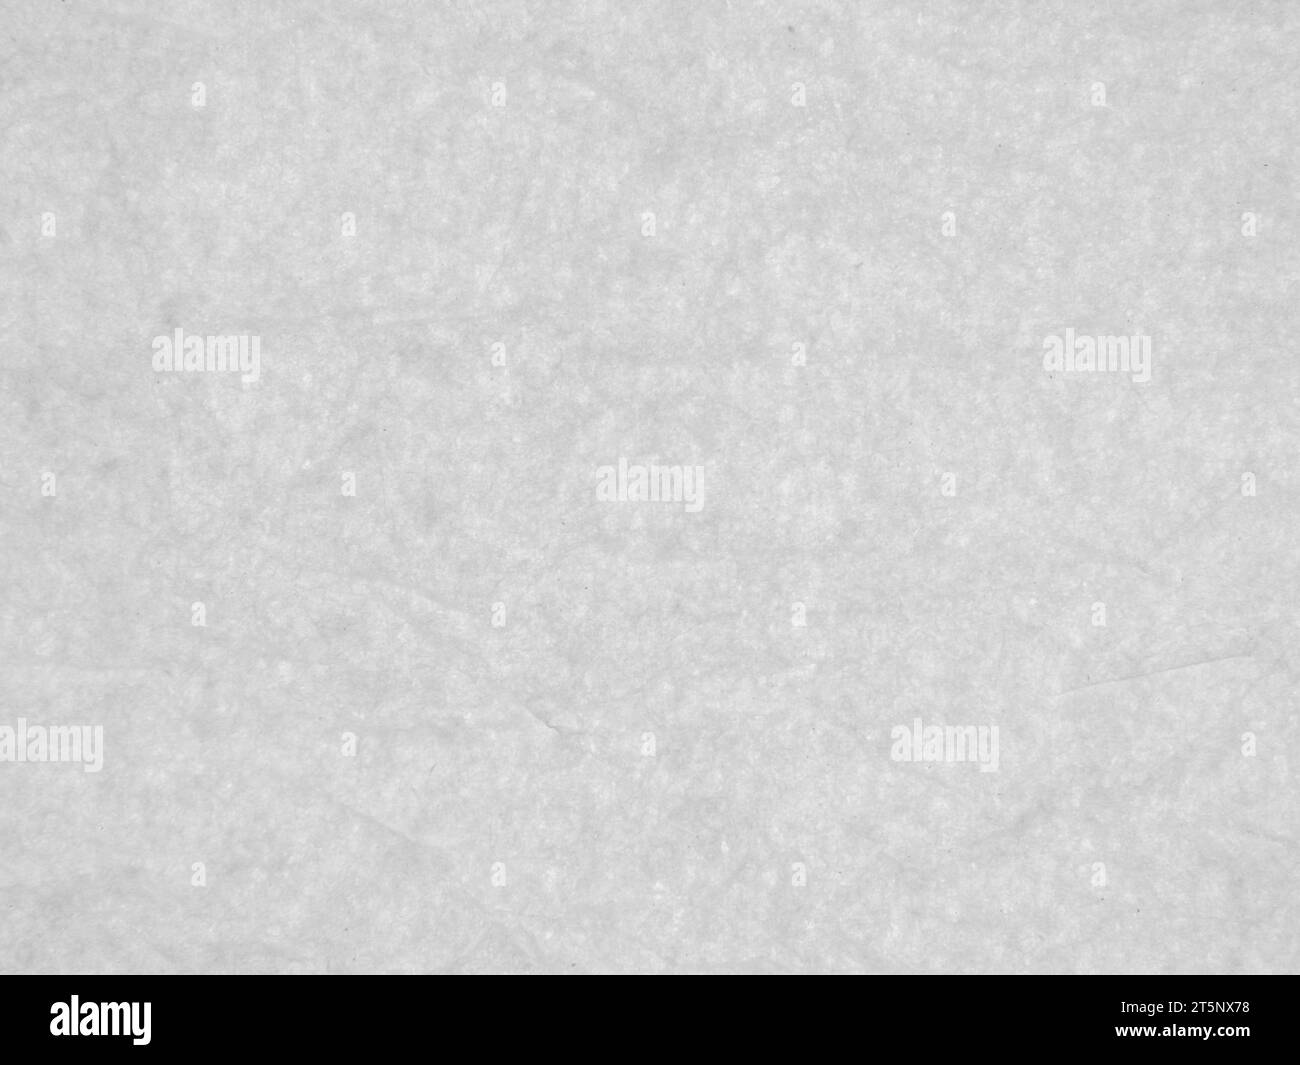 Slightly wrinkled paper sheet. Subtle texture. Low contrast background. Stock Photo